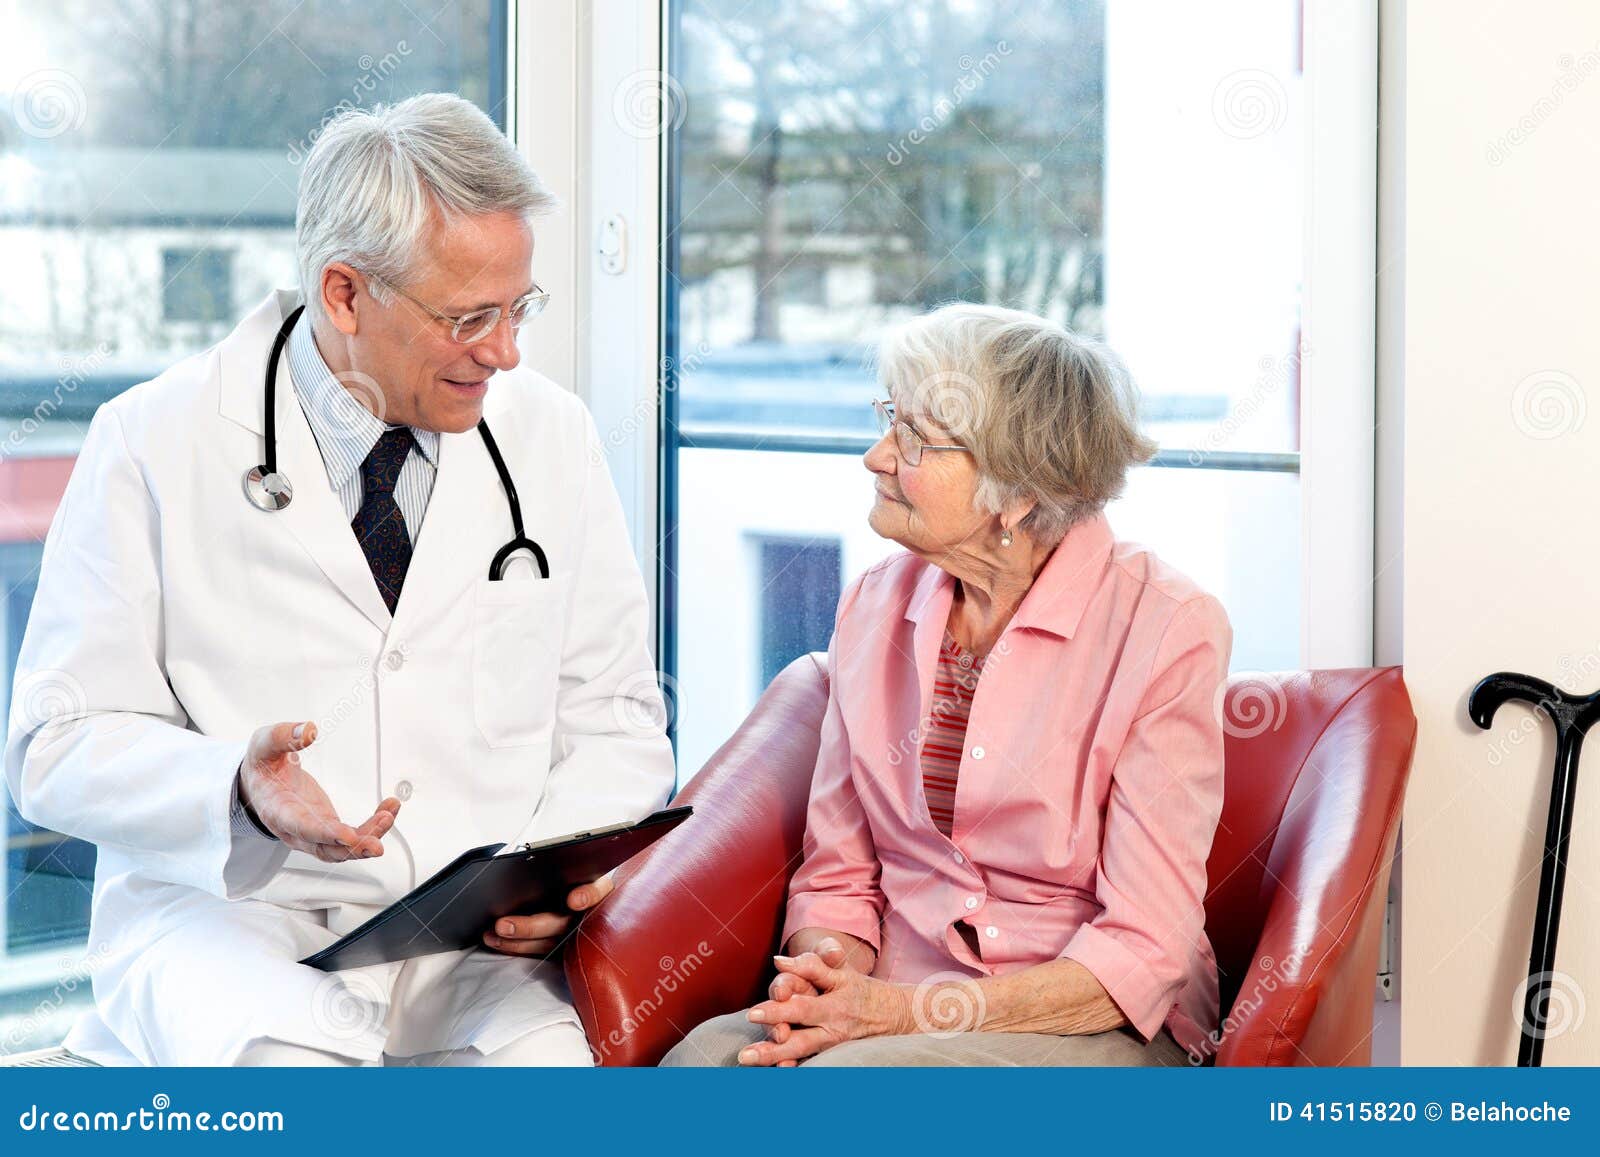 male doctor in consultation with a senior patient